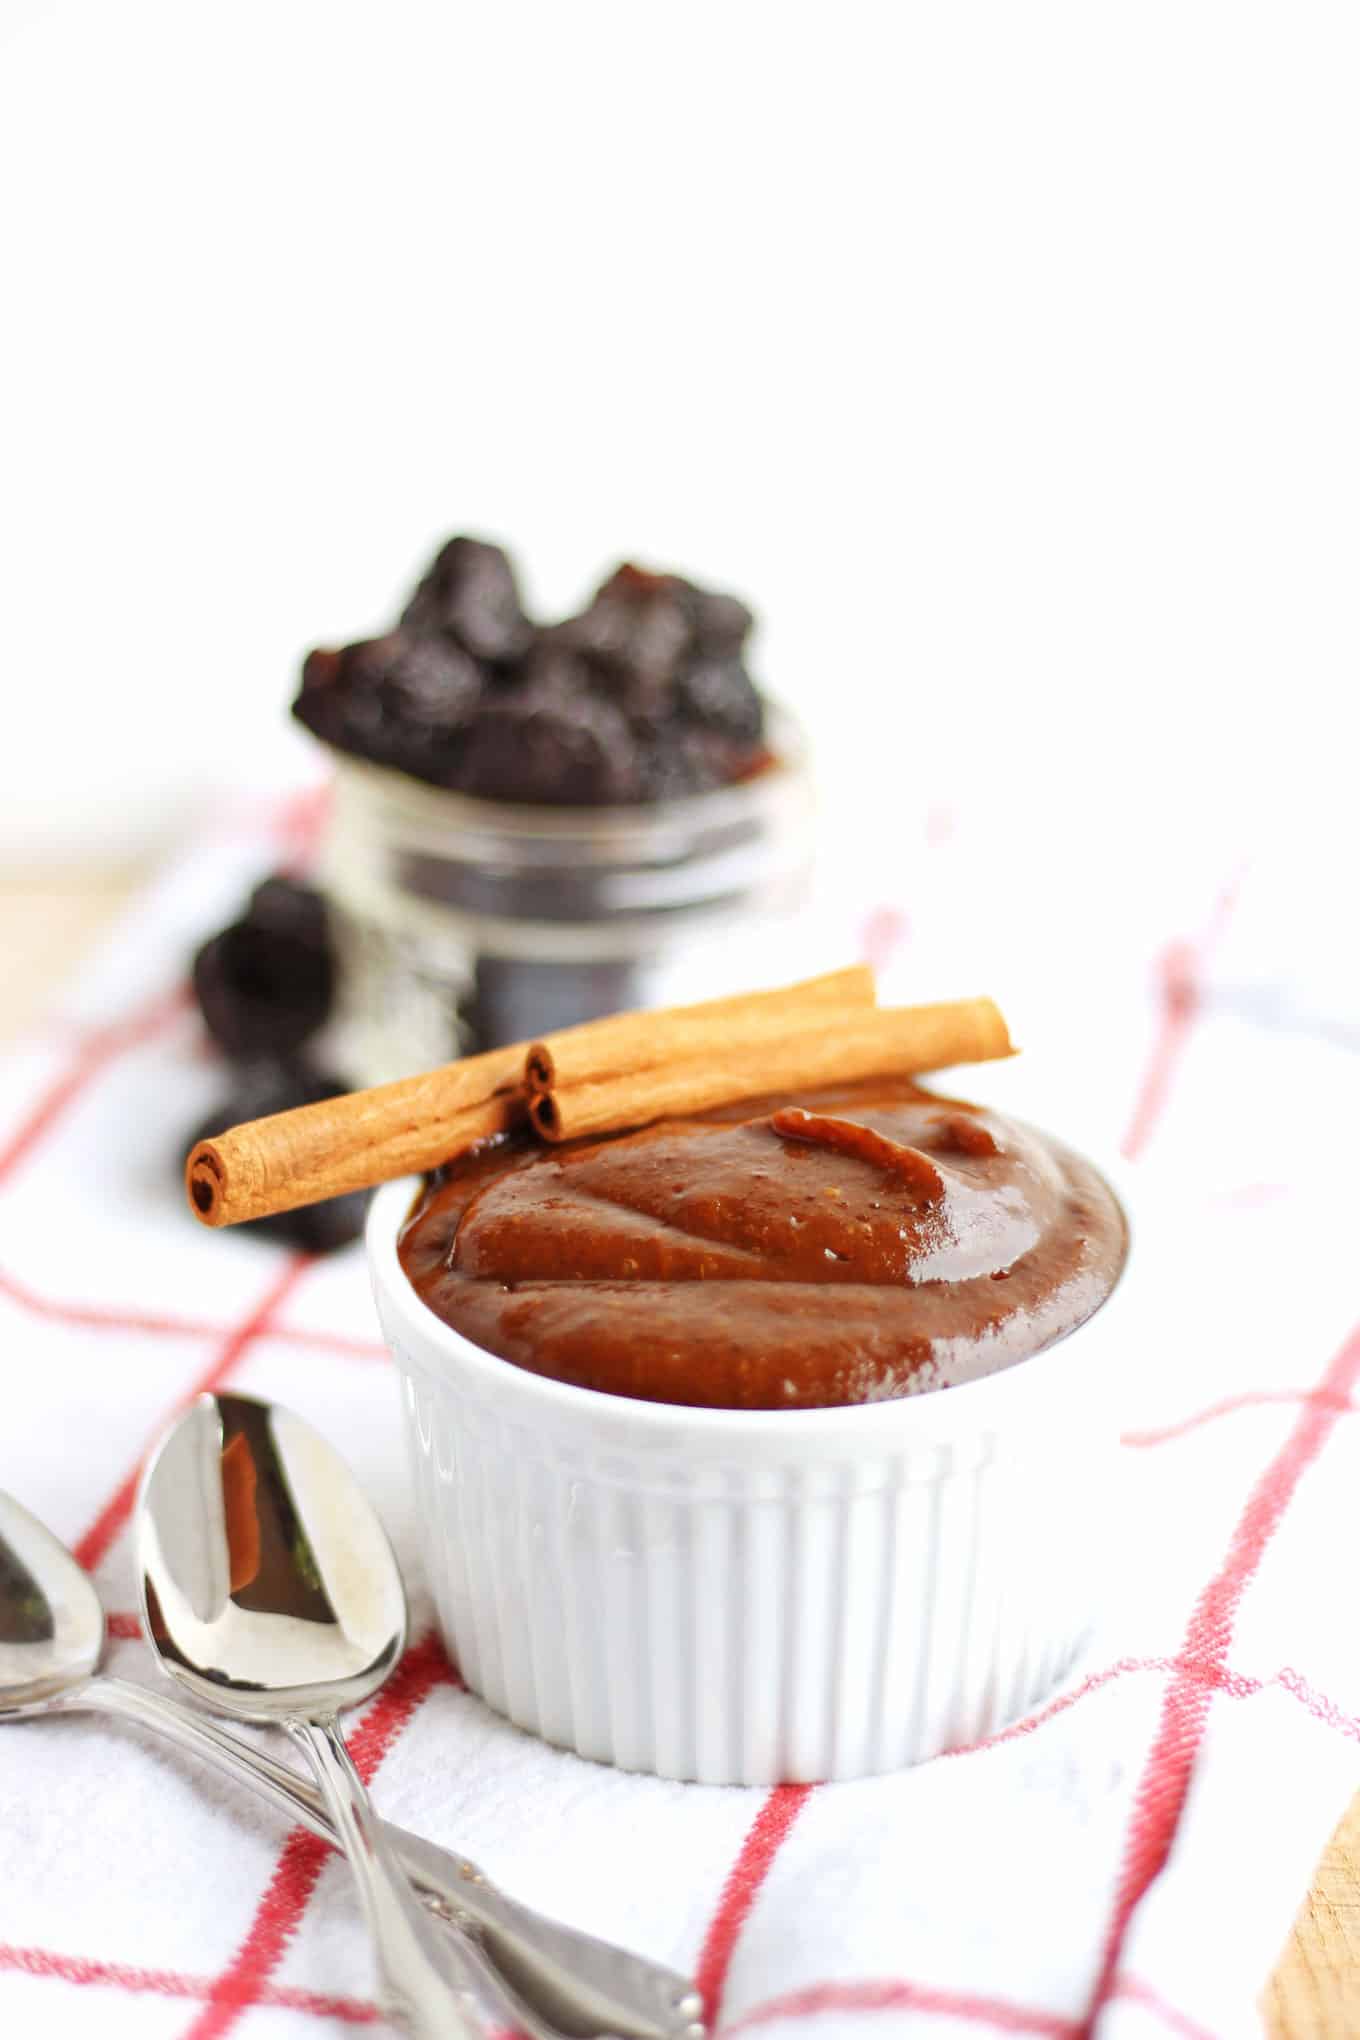 Naturally help your baby’s digestion with this homemade baby food recipe! Quick and easy pureed prunes with cinnamon are naturally sweetened, and taste absolutely delicious. SO EASY! // Rhubarbarians